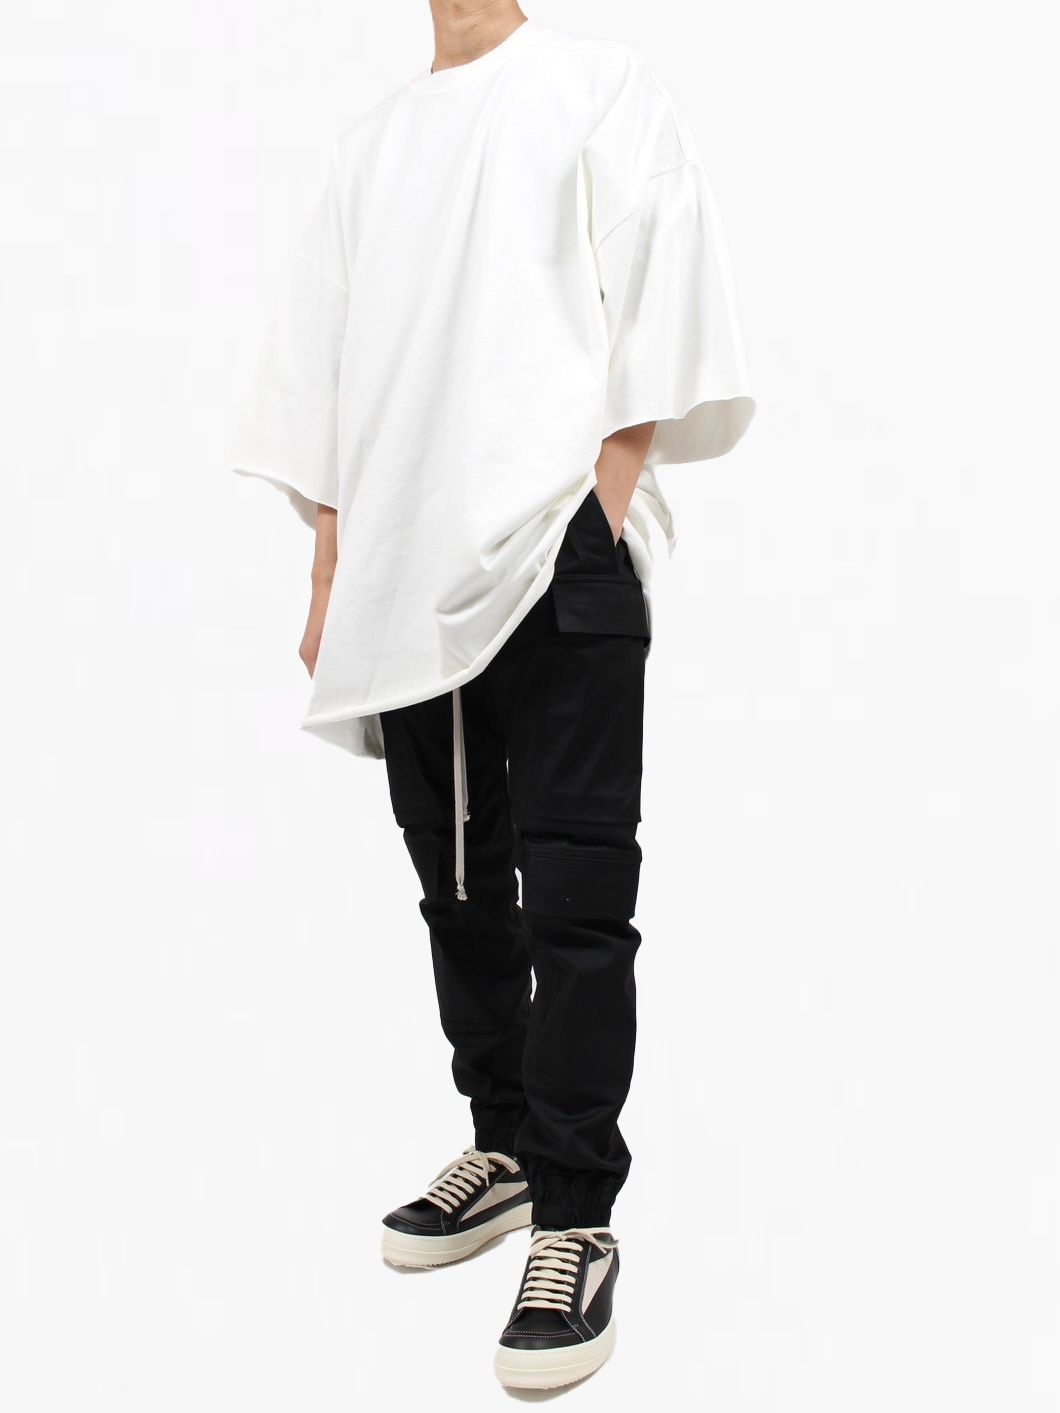 RICK OWENS - 【24SS】半袖 トミー スーパービッグ Tシャツ / TOMMY T 